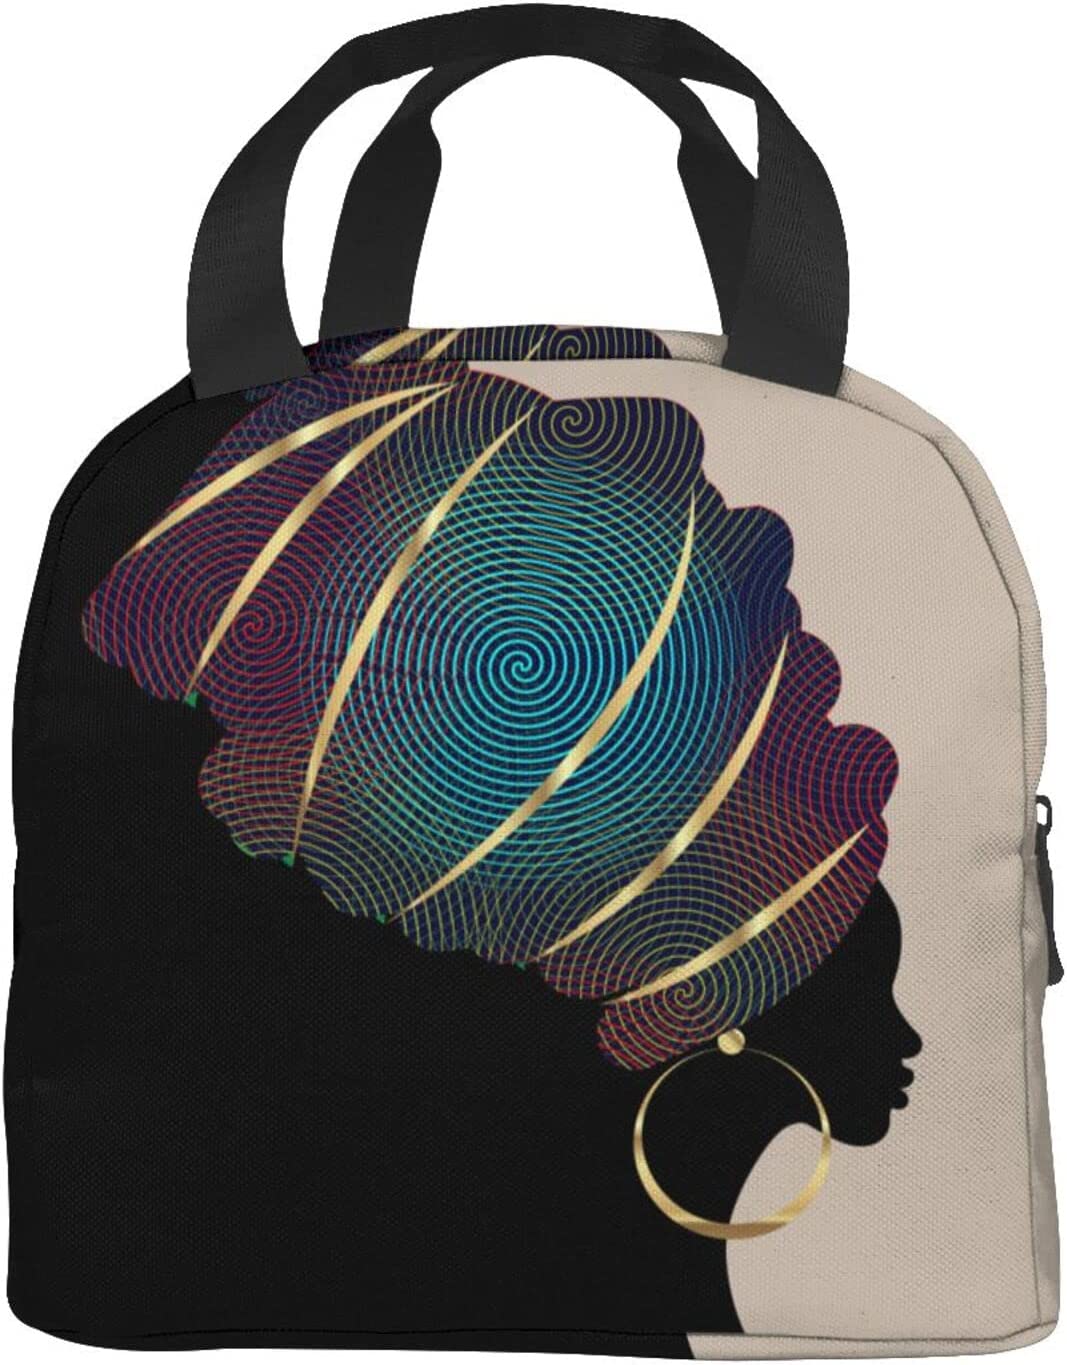 Afro Tote Lunch Bag